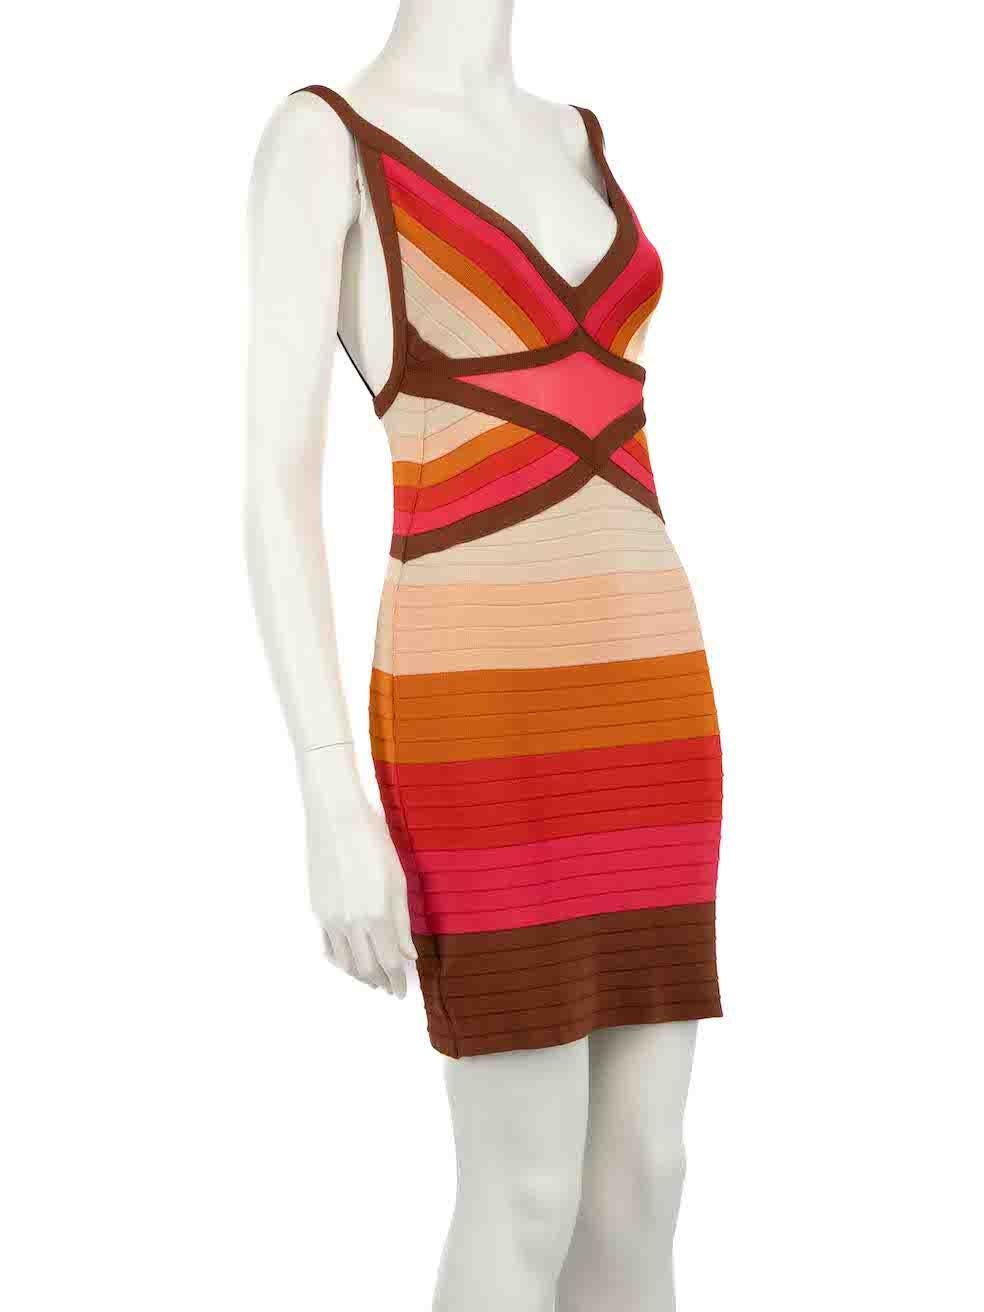 CONDITION is Good. Minor wear to dress is evident. Light wear to the composition with a number of plucks to the knit found throughout on this used M Missoni designer resale item.
 
 
 
 Details
 
 
 Multicolour
 
 Viscose
 
 Knit dress
 
 Striped